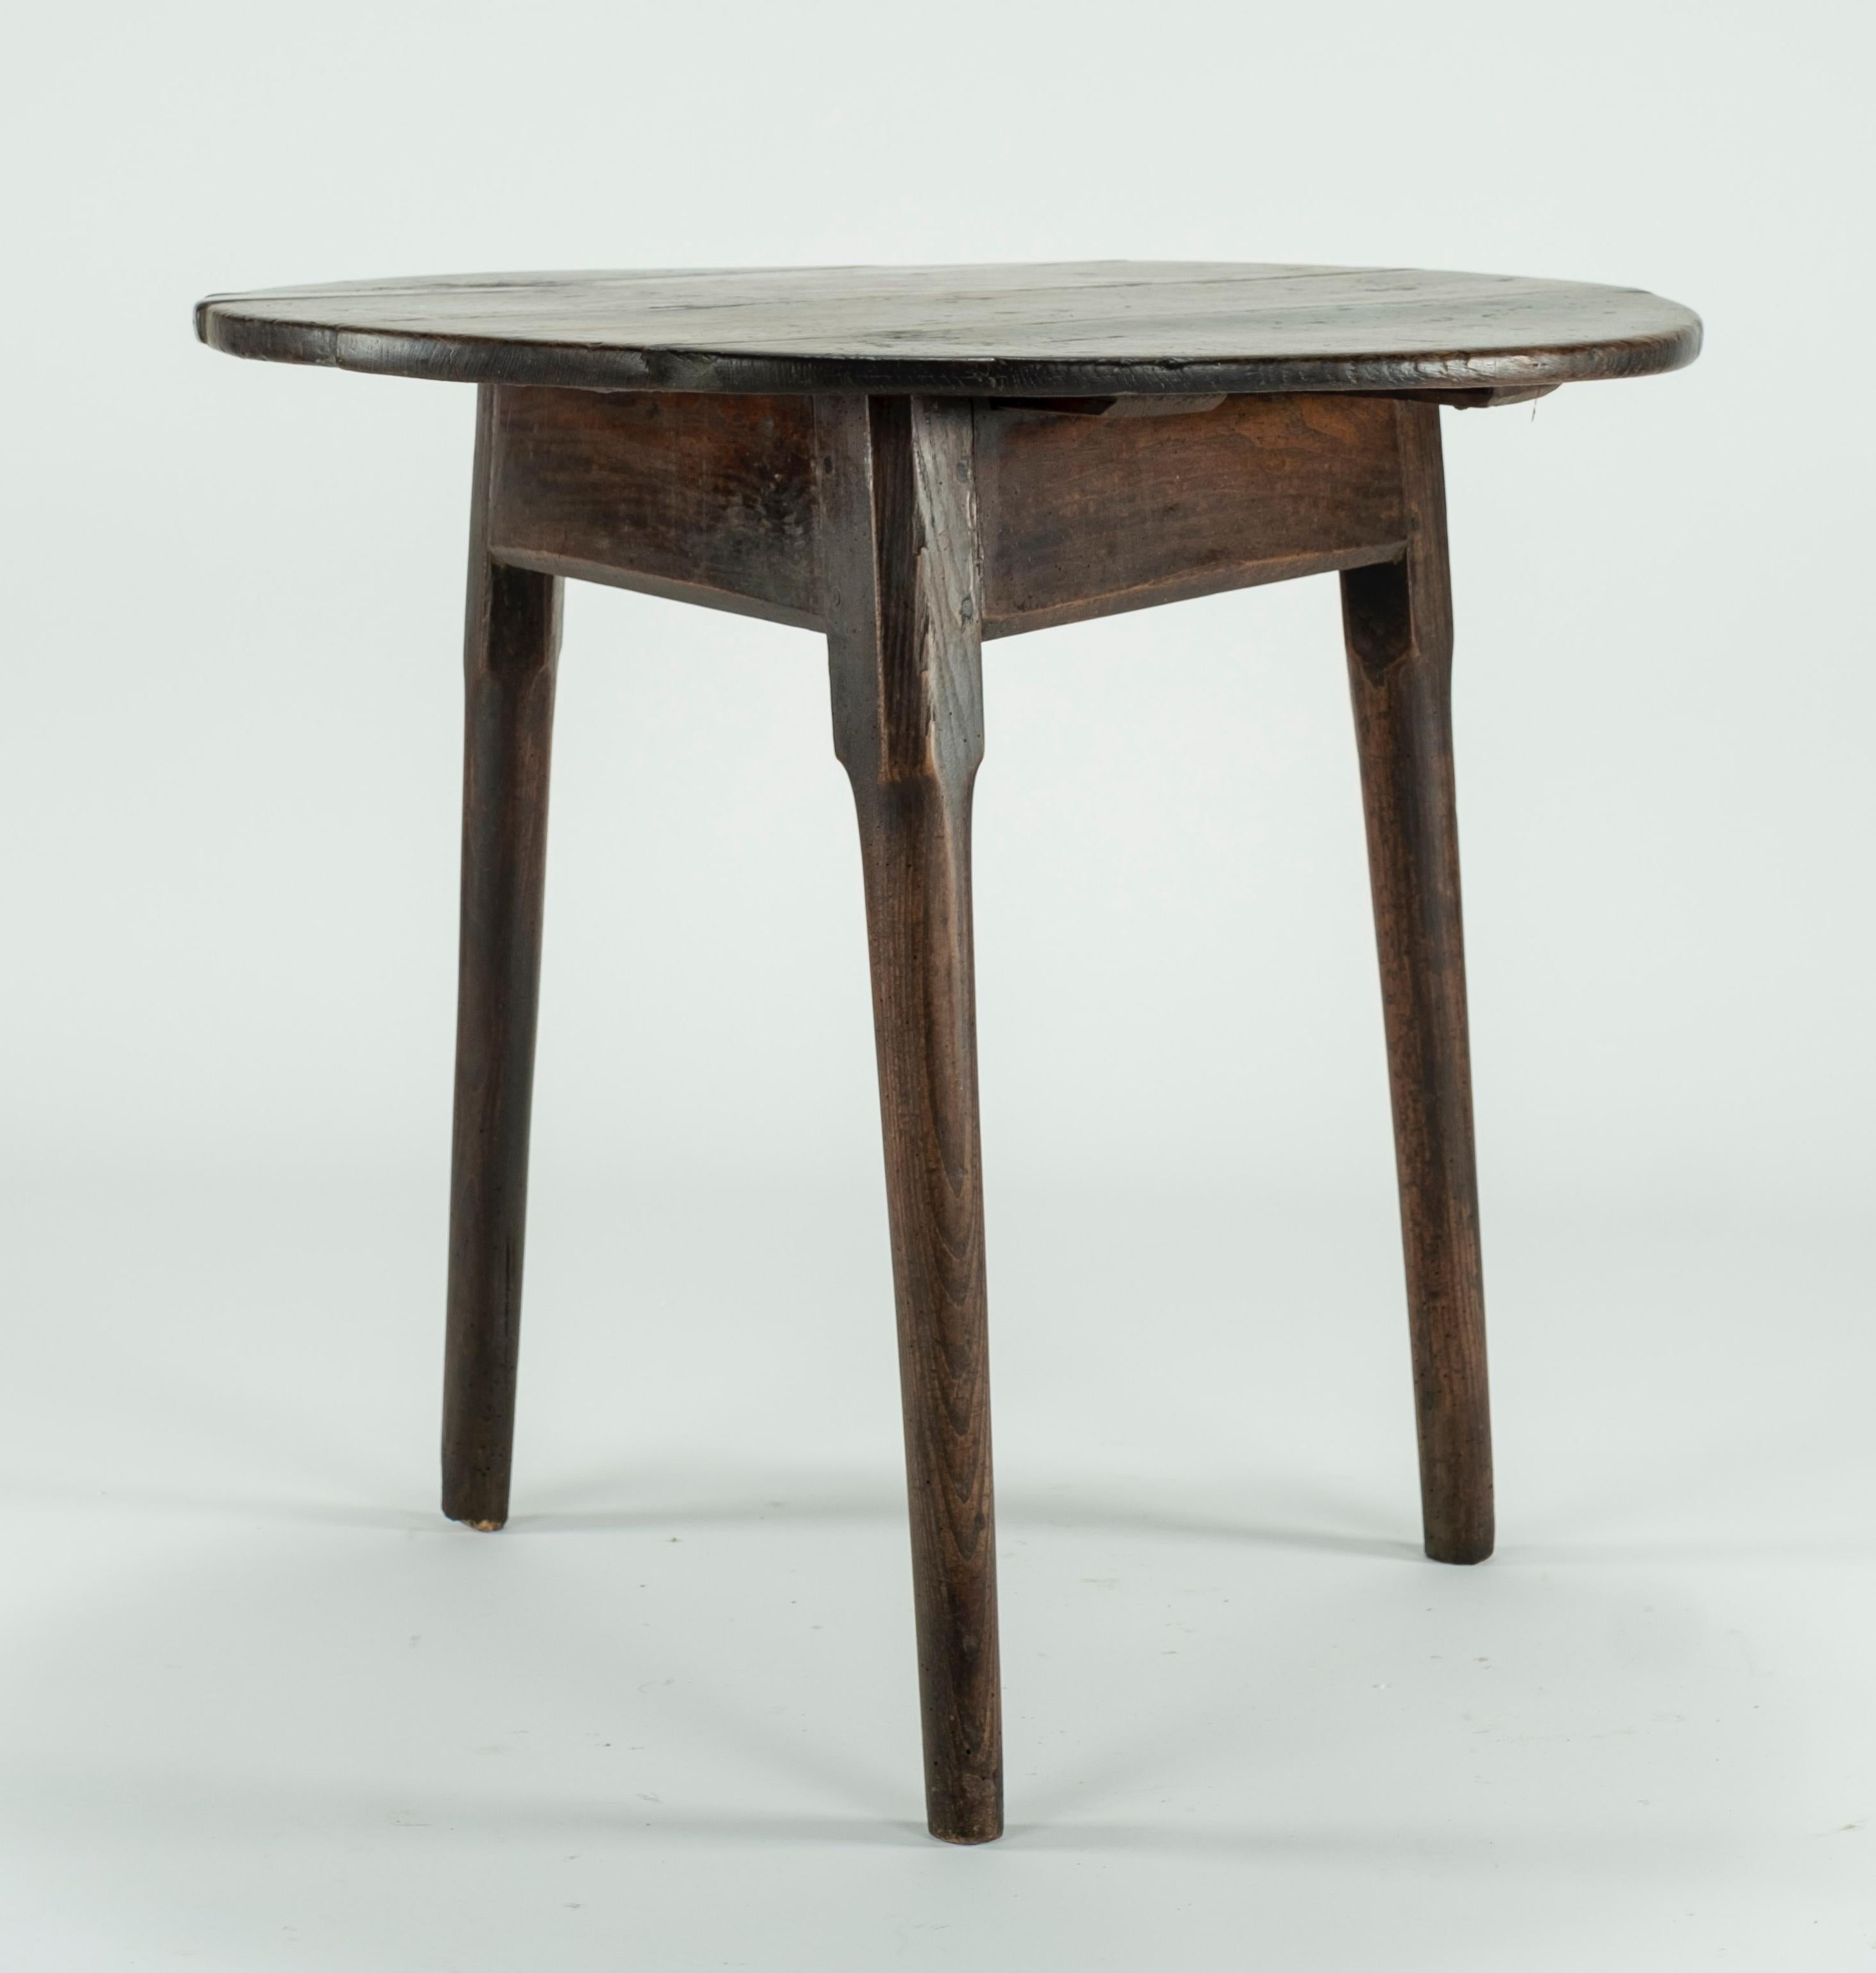 Good George II oak cricket table with circular top and standing on three plain 'pole' legs. Great rich color with stunning waxed patina. A lovely rustic item.